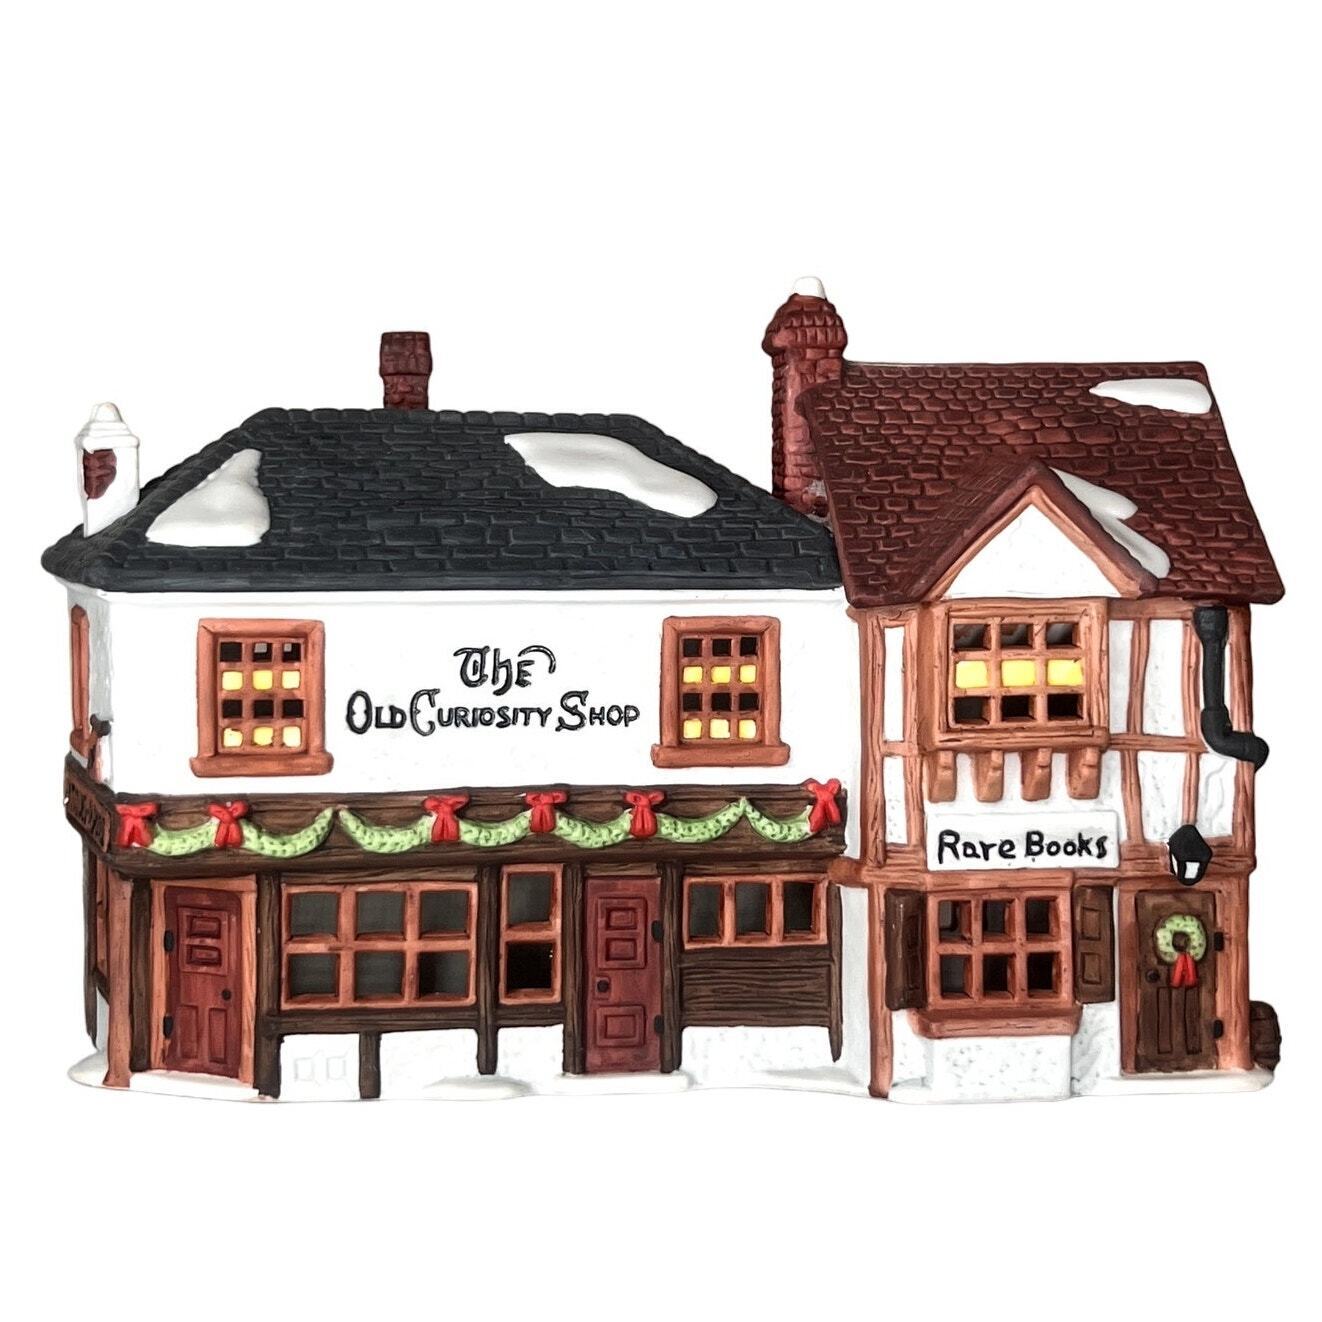 1987 Dept 56 Dickens Village The Old Curiosity Shop - Lighted House - Unboxed